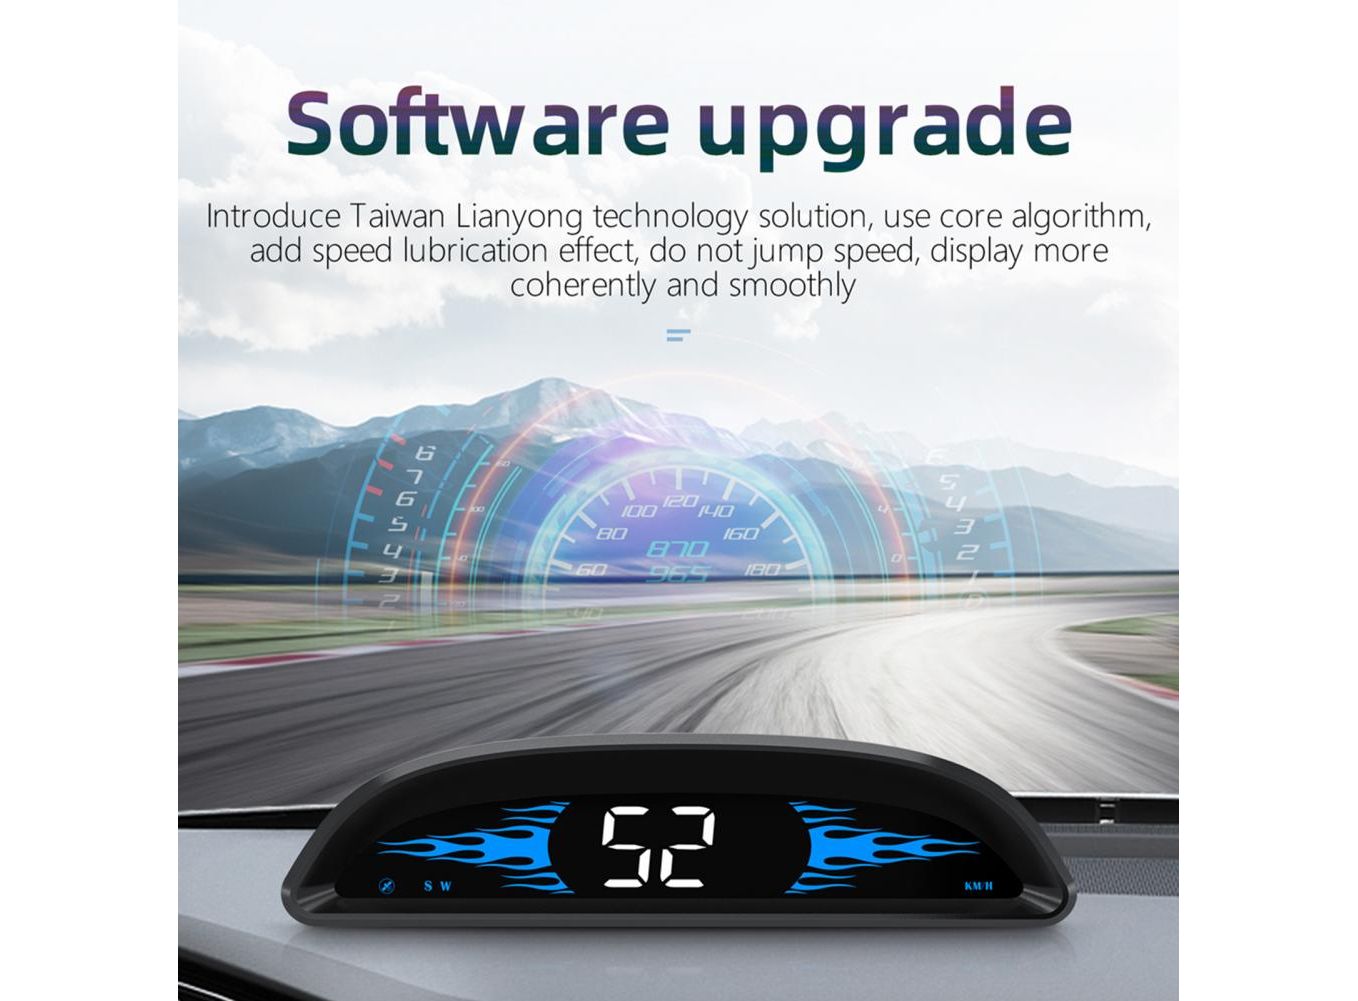 https://protechshop.co.uk/images/thumbnails/1358/1001/detailed/90/G2-Auto-OBD2-GPS-Head-Up-Display-Car-Electronics-HUD-Projector-Display-Digital-Car-Speedometer-Accessories.jpg